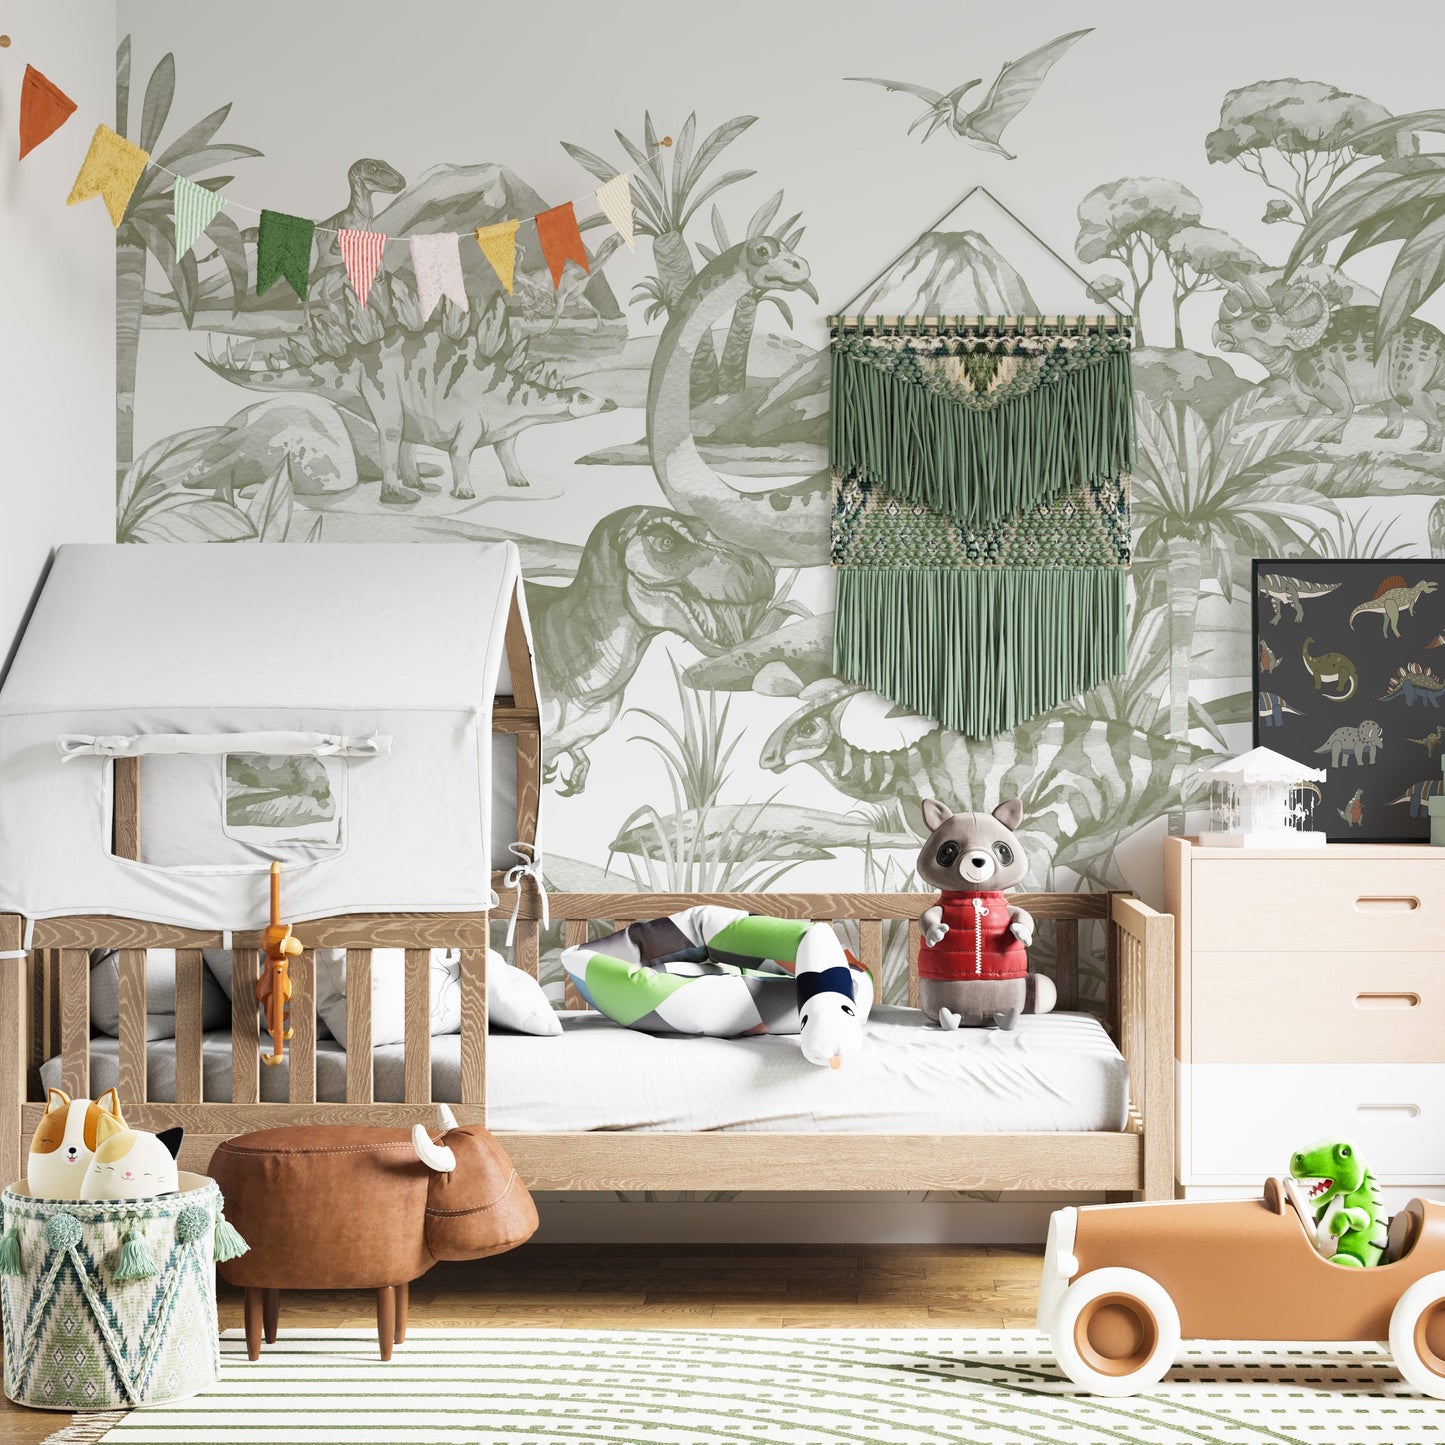 Cute Jungle Animals Wallpaper for Kids Room Nursery  lifencolors